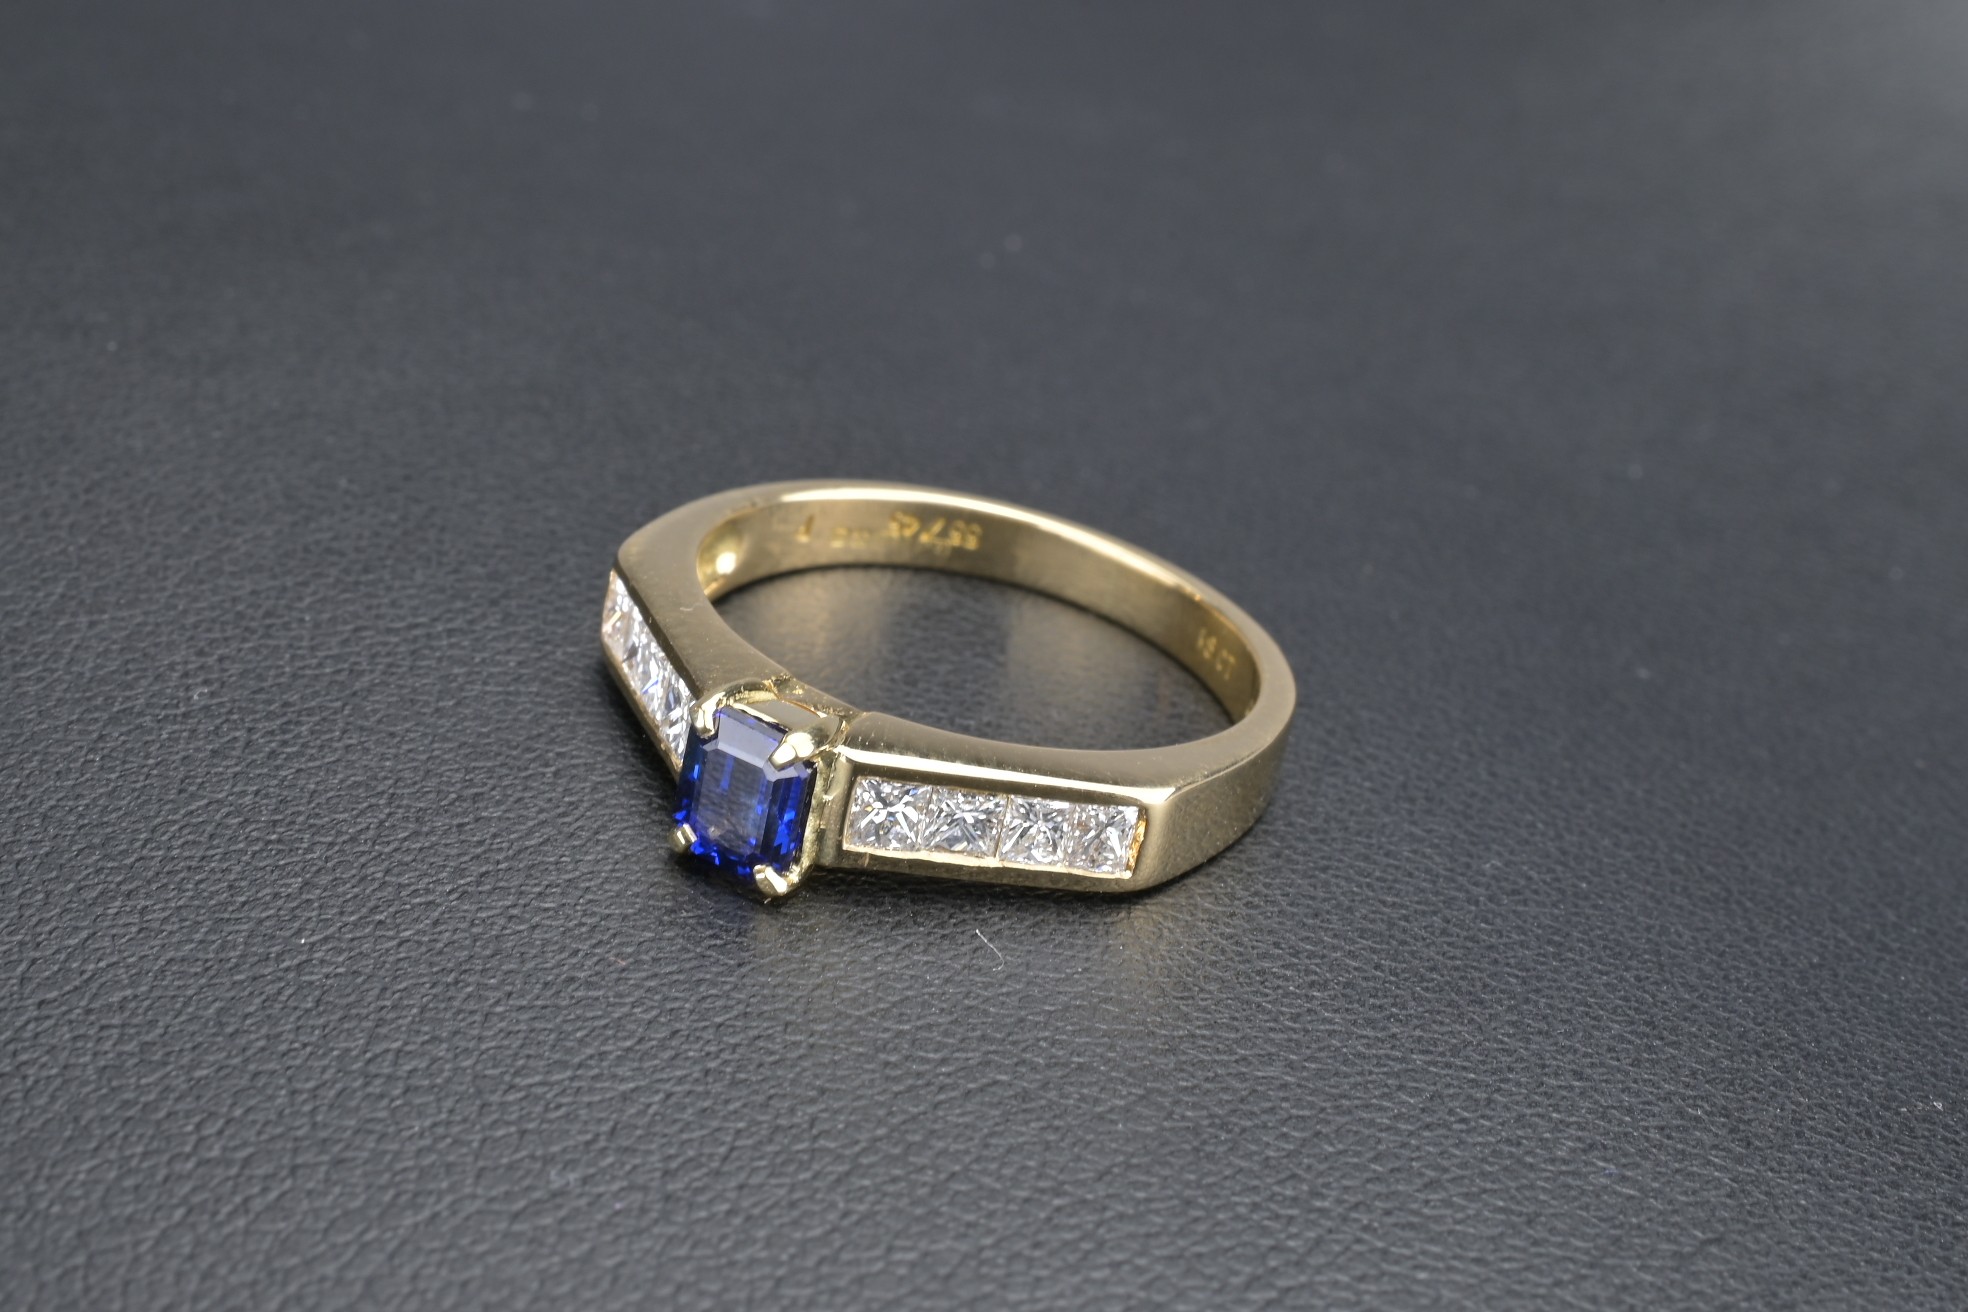 AN 18CT DIAMOND AND SAPPHIRE DRESS RING. Emerald cut 0.63ct sapphire set in 18ct yellow gold with - Image 3 of 8